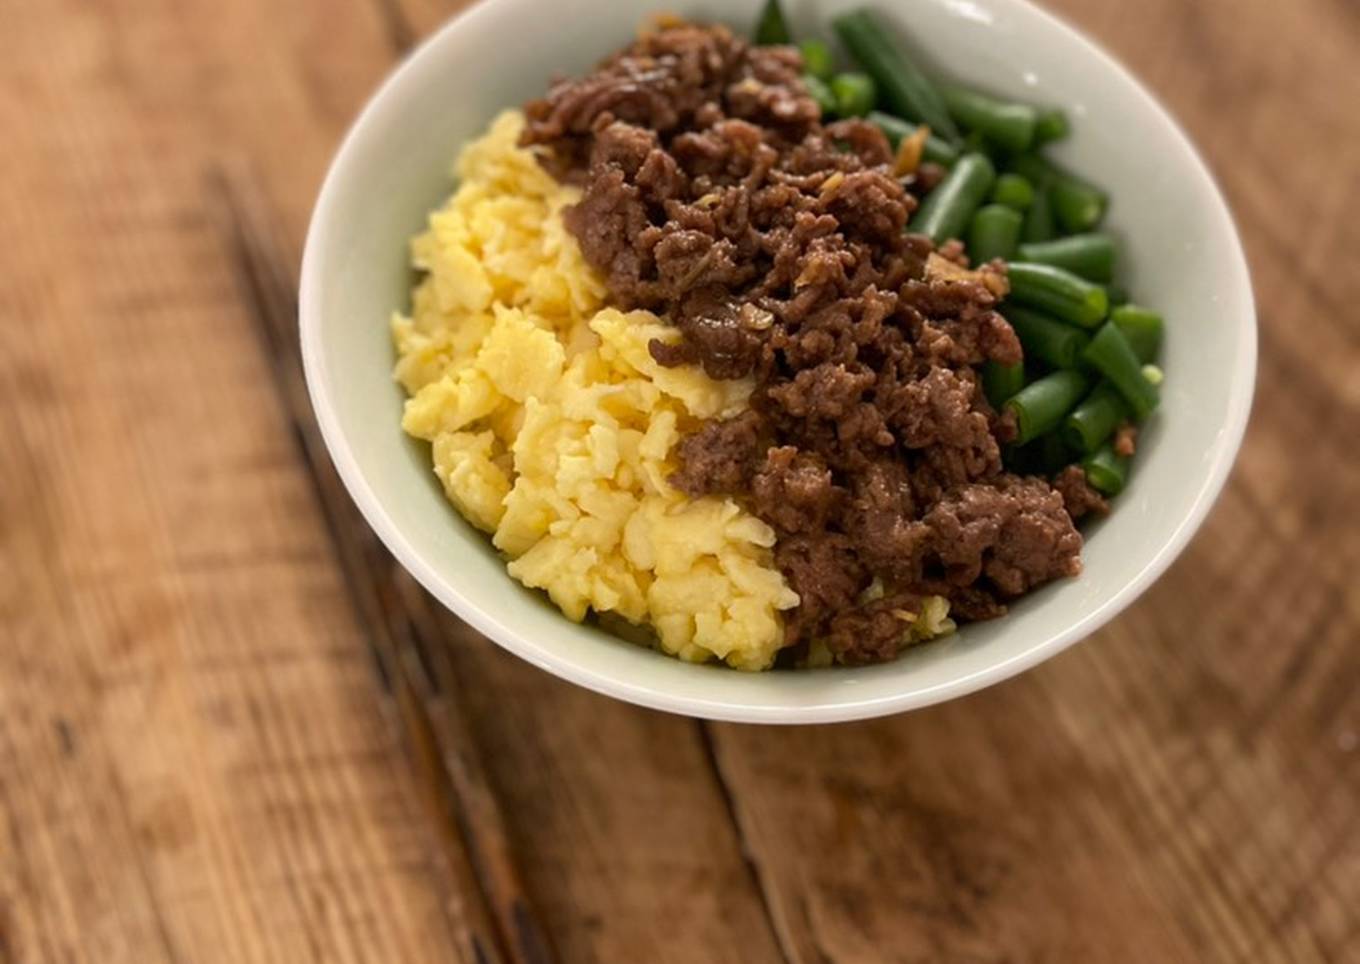 🍚 Tricolor Donburi – Japanese bowl of rice with minced meat, eggs and green vegetable